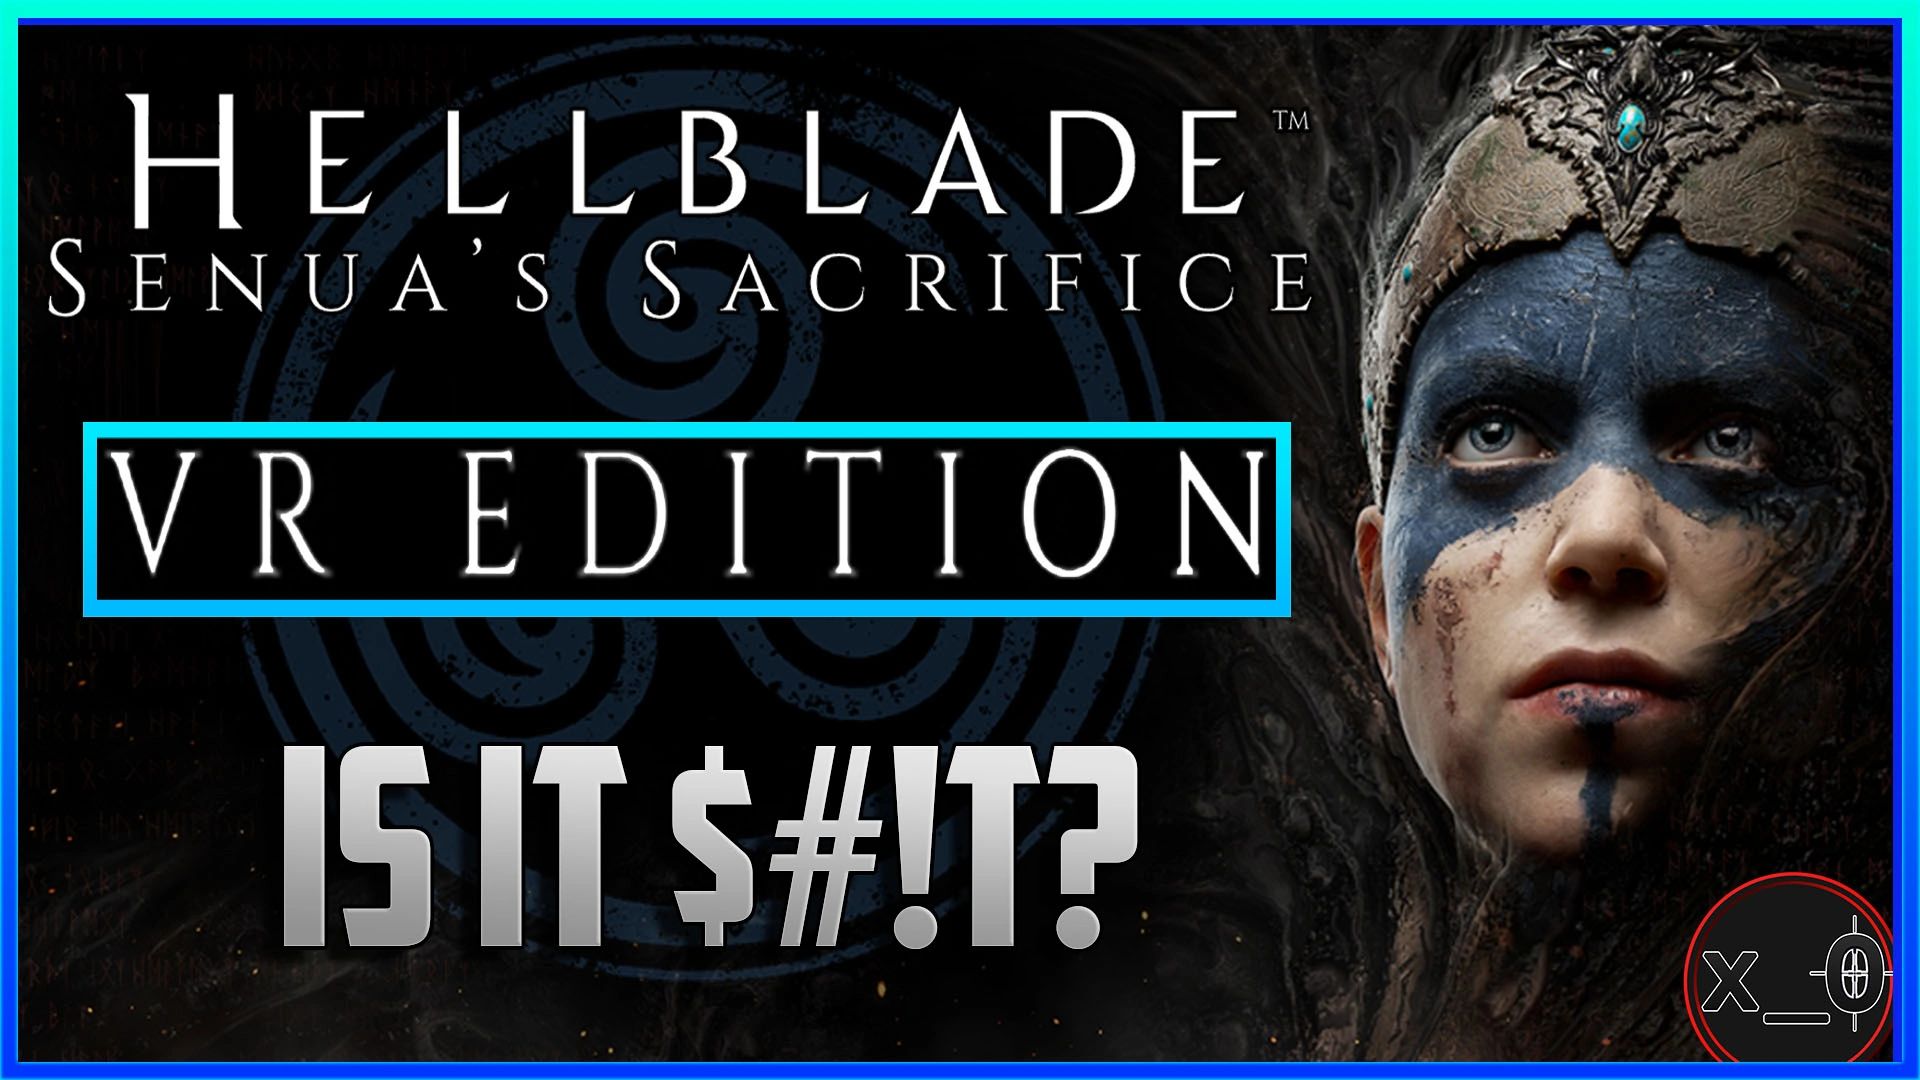 HELLBLADE: SENUA'S SACRIFICE 'VR EDITION' | Full Review, Gameplay